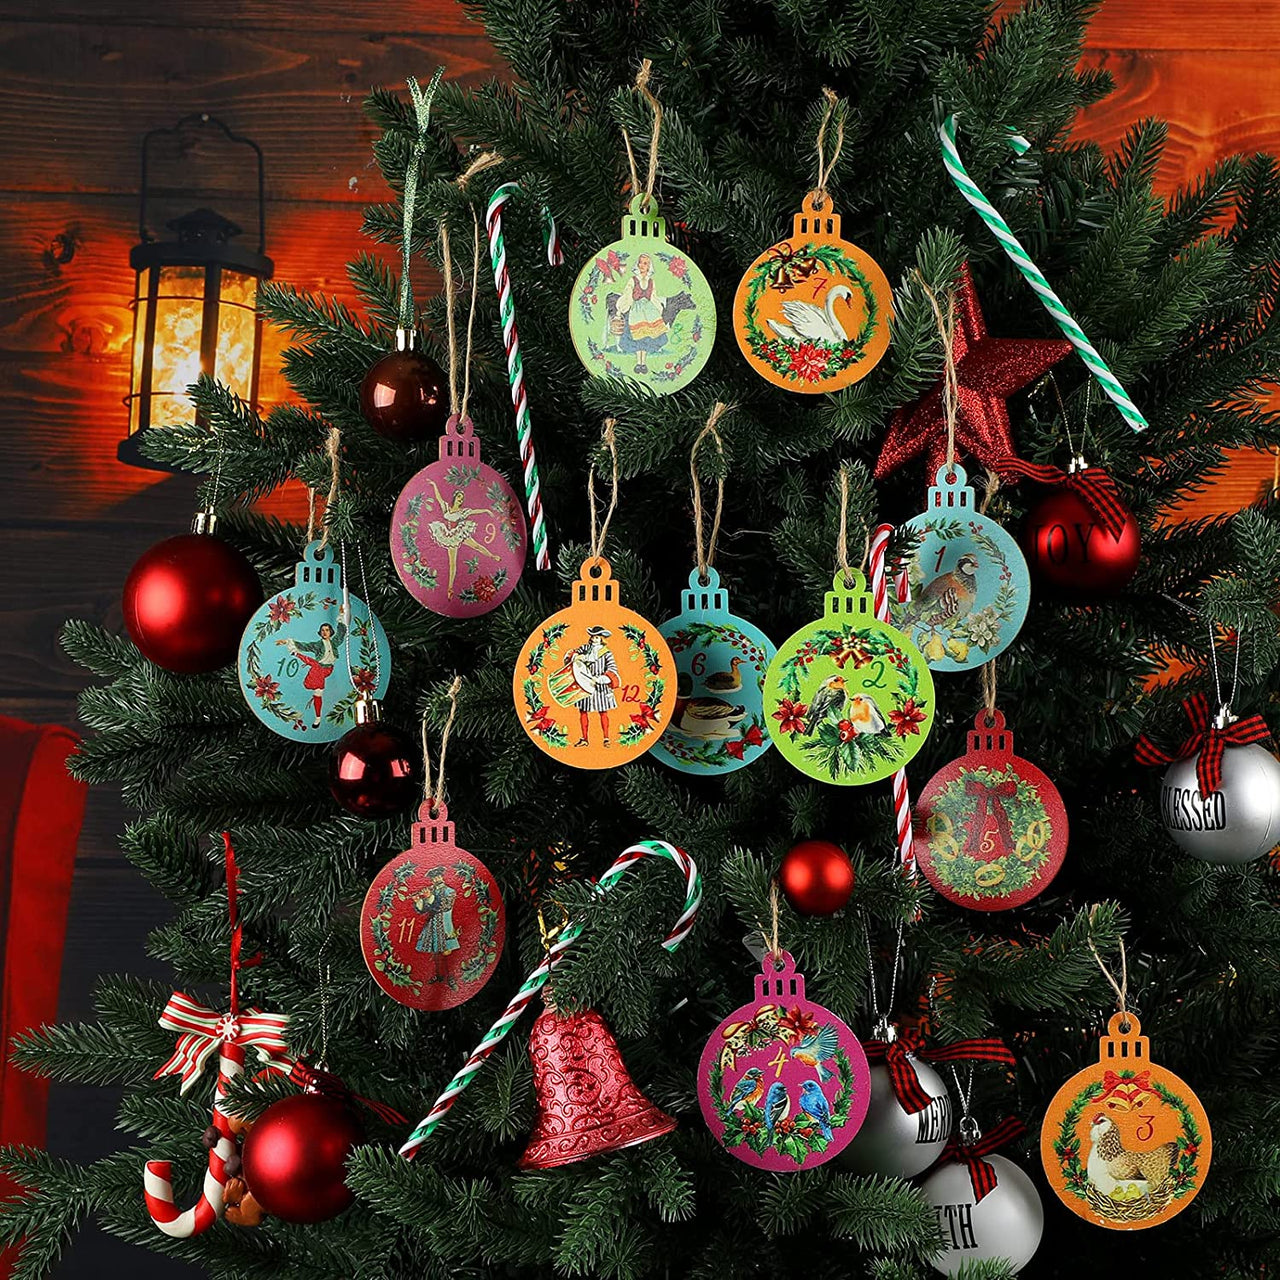 12 Pieces 12 Days of Christmas Ornaments Wooden Christmas Ornament Hanging Christmas Tree Decorations 3.15 Inches Rustic Vintage Cute Xmas Ornaments for Party Supplies Wall Decor Indoor Outdoor